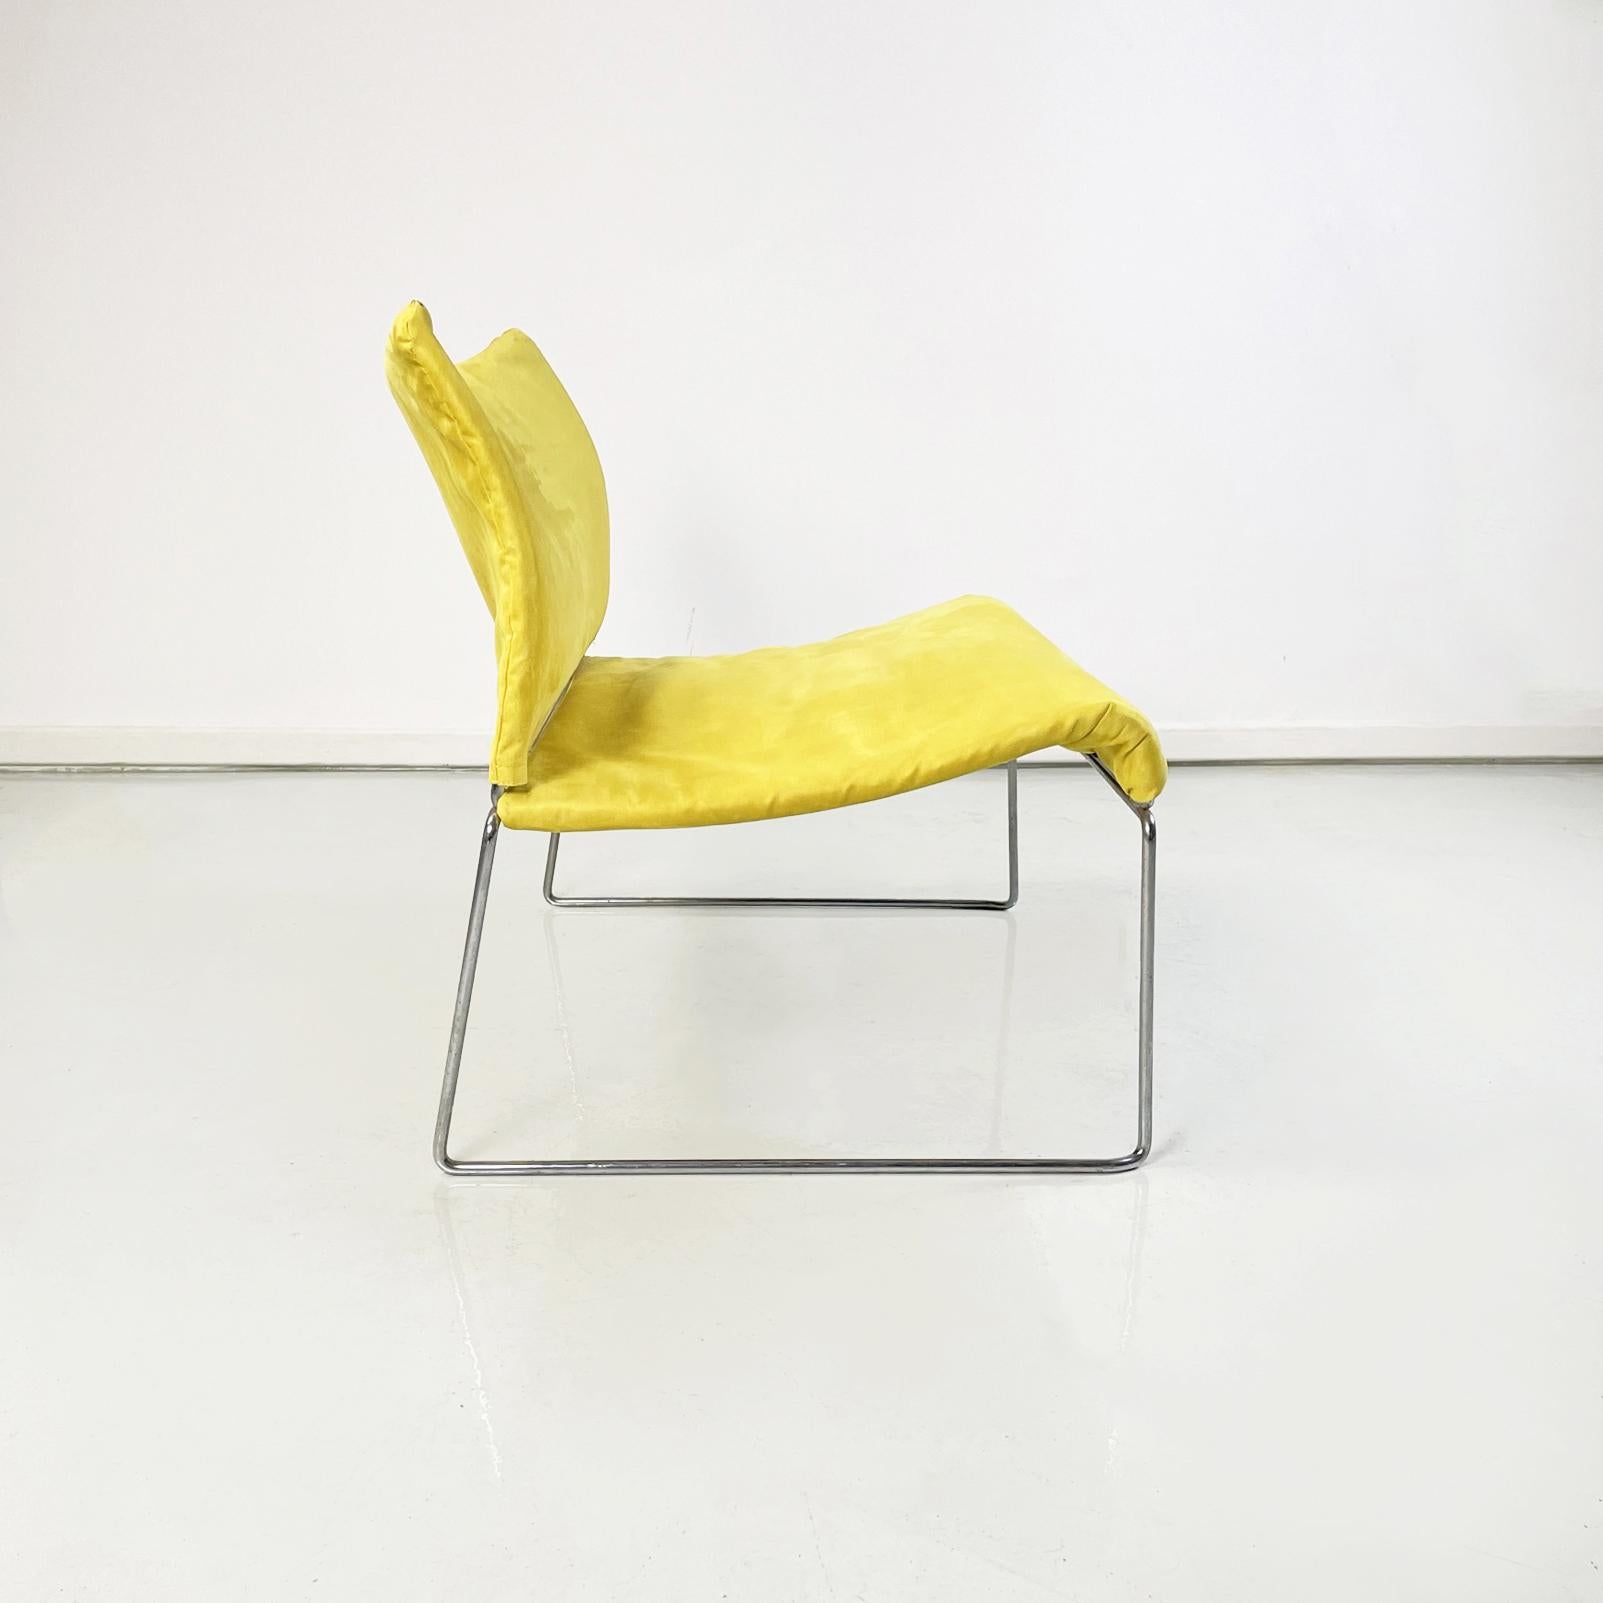 Italian Modern Yellow Armchair Mod, Saghi by Kazuhide Takahama for Gavina, 1970s In Good Condition For Sale In MIlano, IT